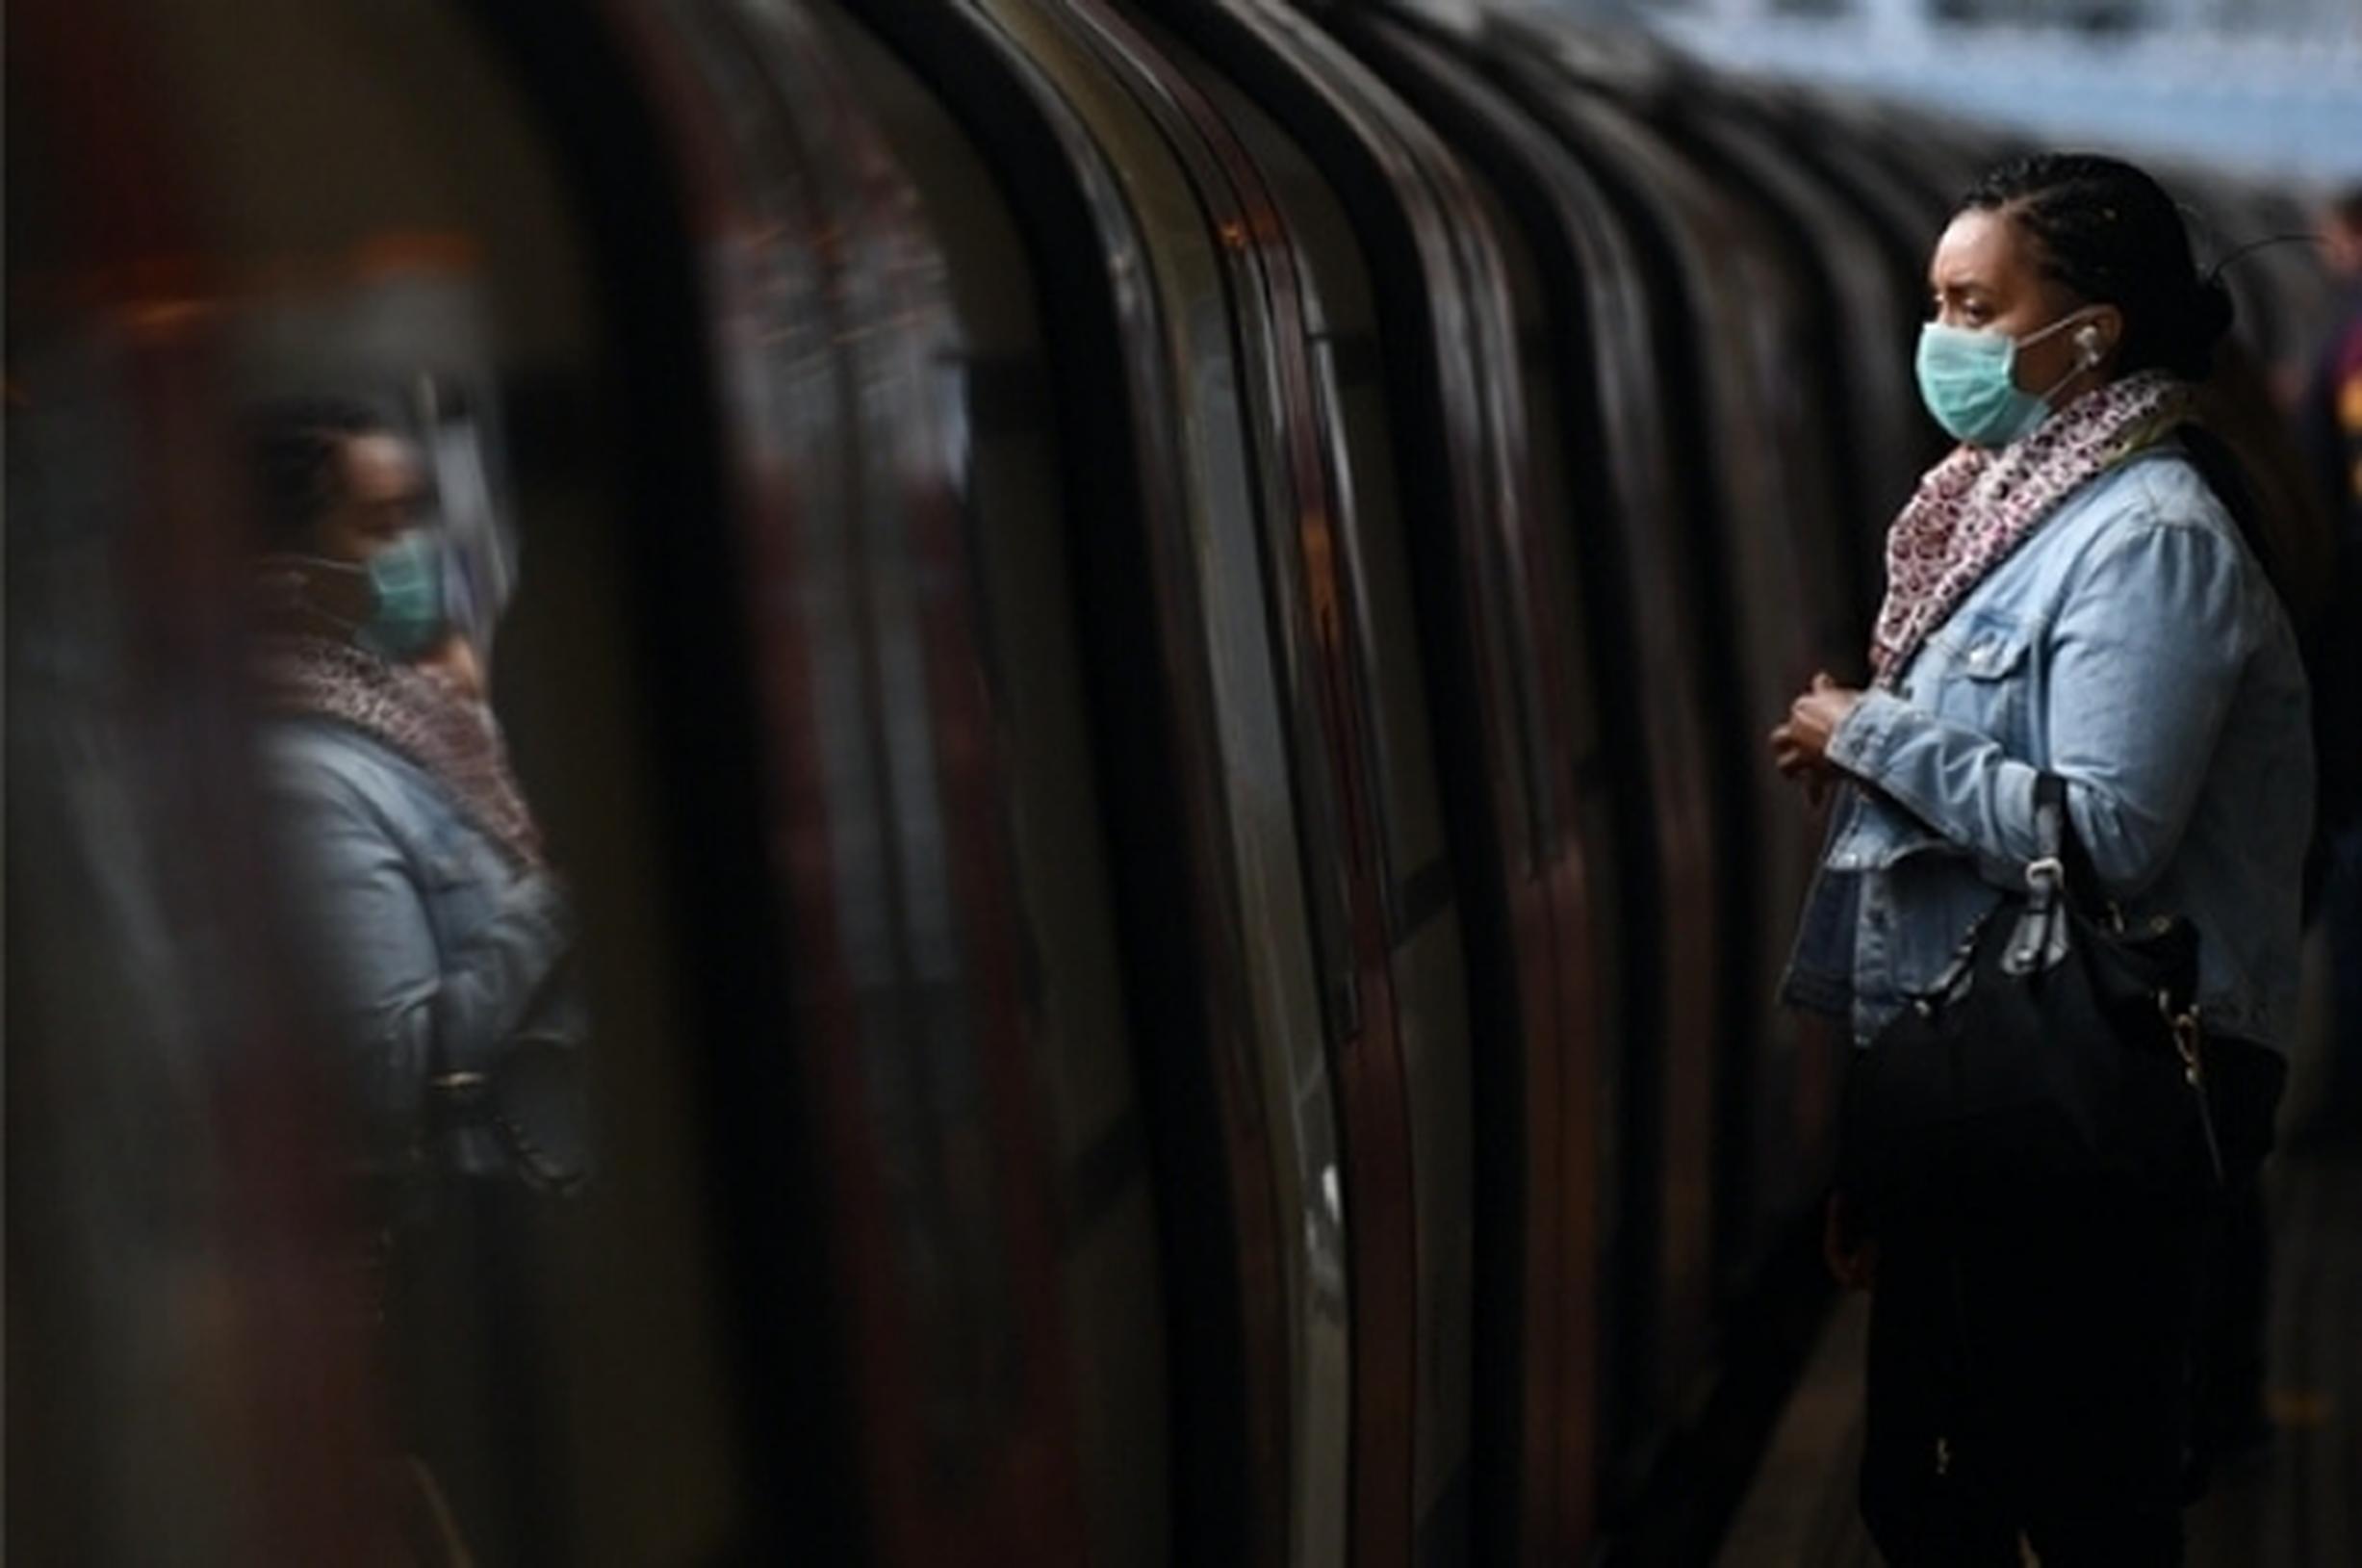 The RMT wants face coverings to remain mandatory on public transport